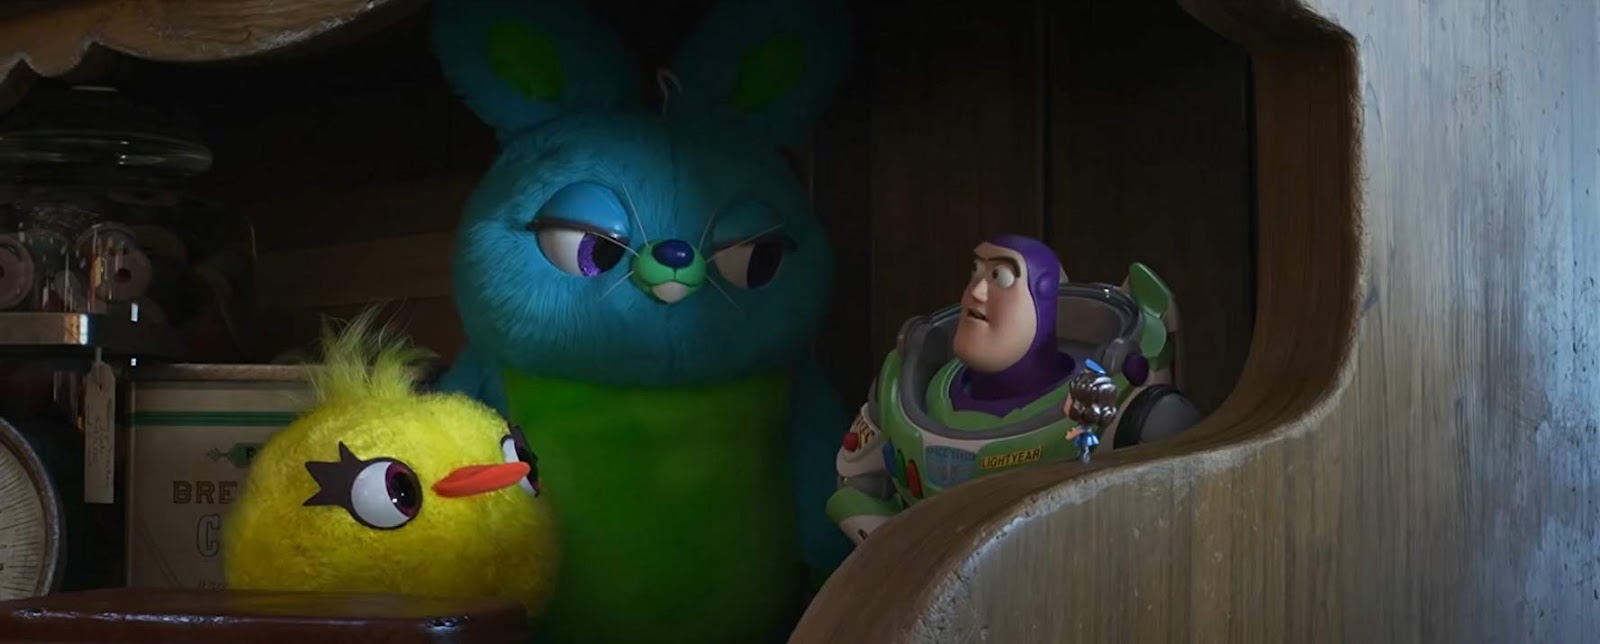 Movie still of Toy Story 4 showing Ducky, Bunny, and Buzz Lightyear played by Jordan Peele, Keegen-Michael Key, and Tim Allen